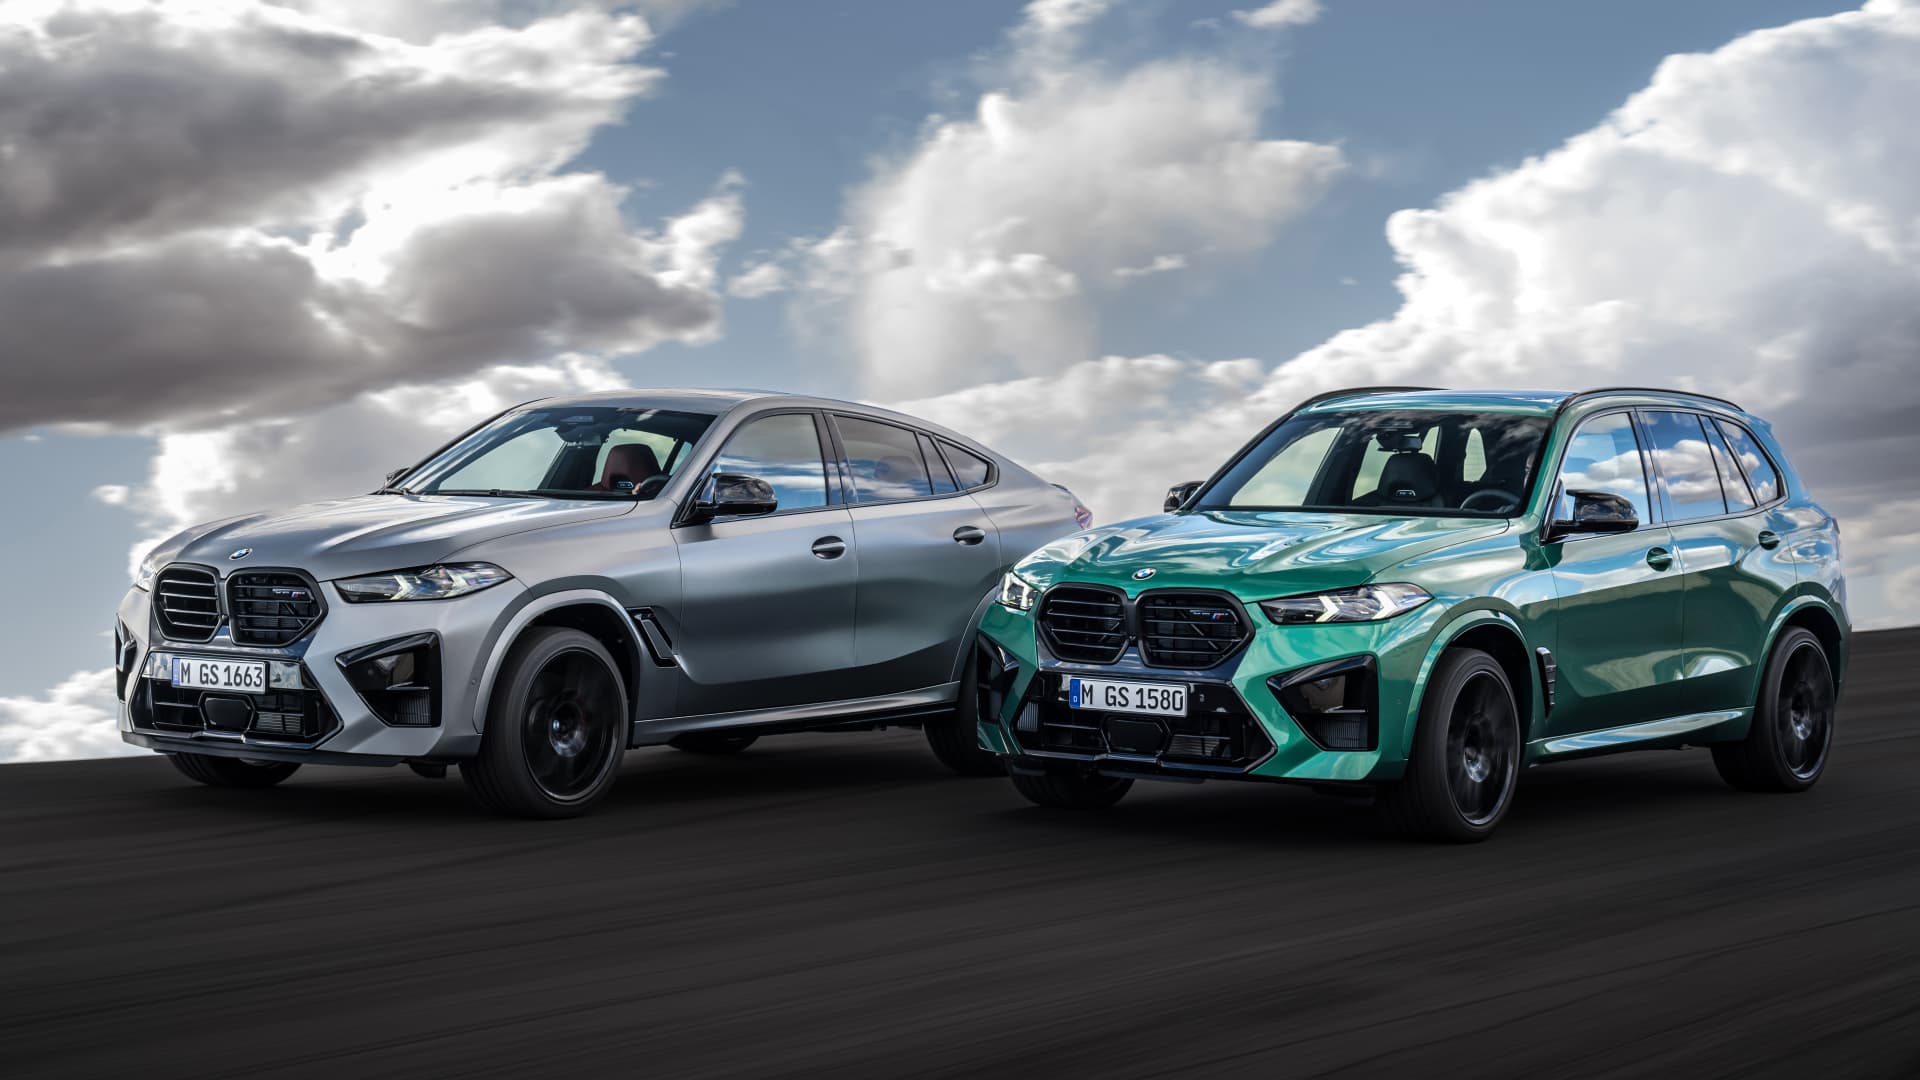 Bmw X5 M X6 Price And Specs Facelift Prices Rise By